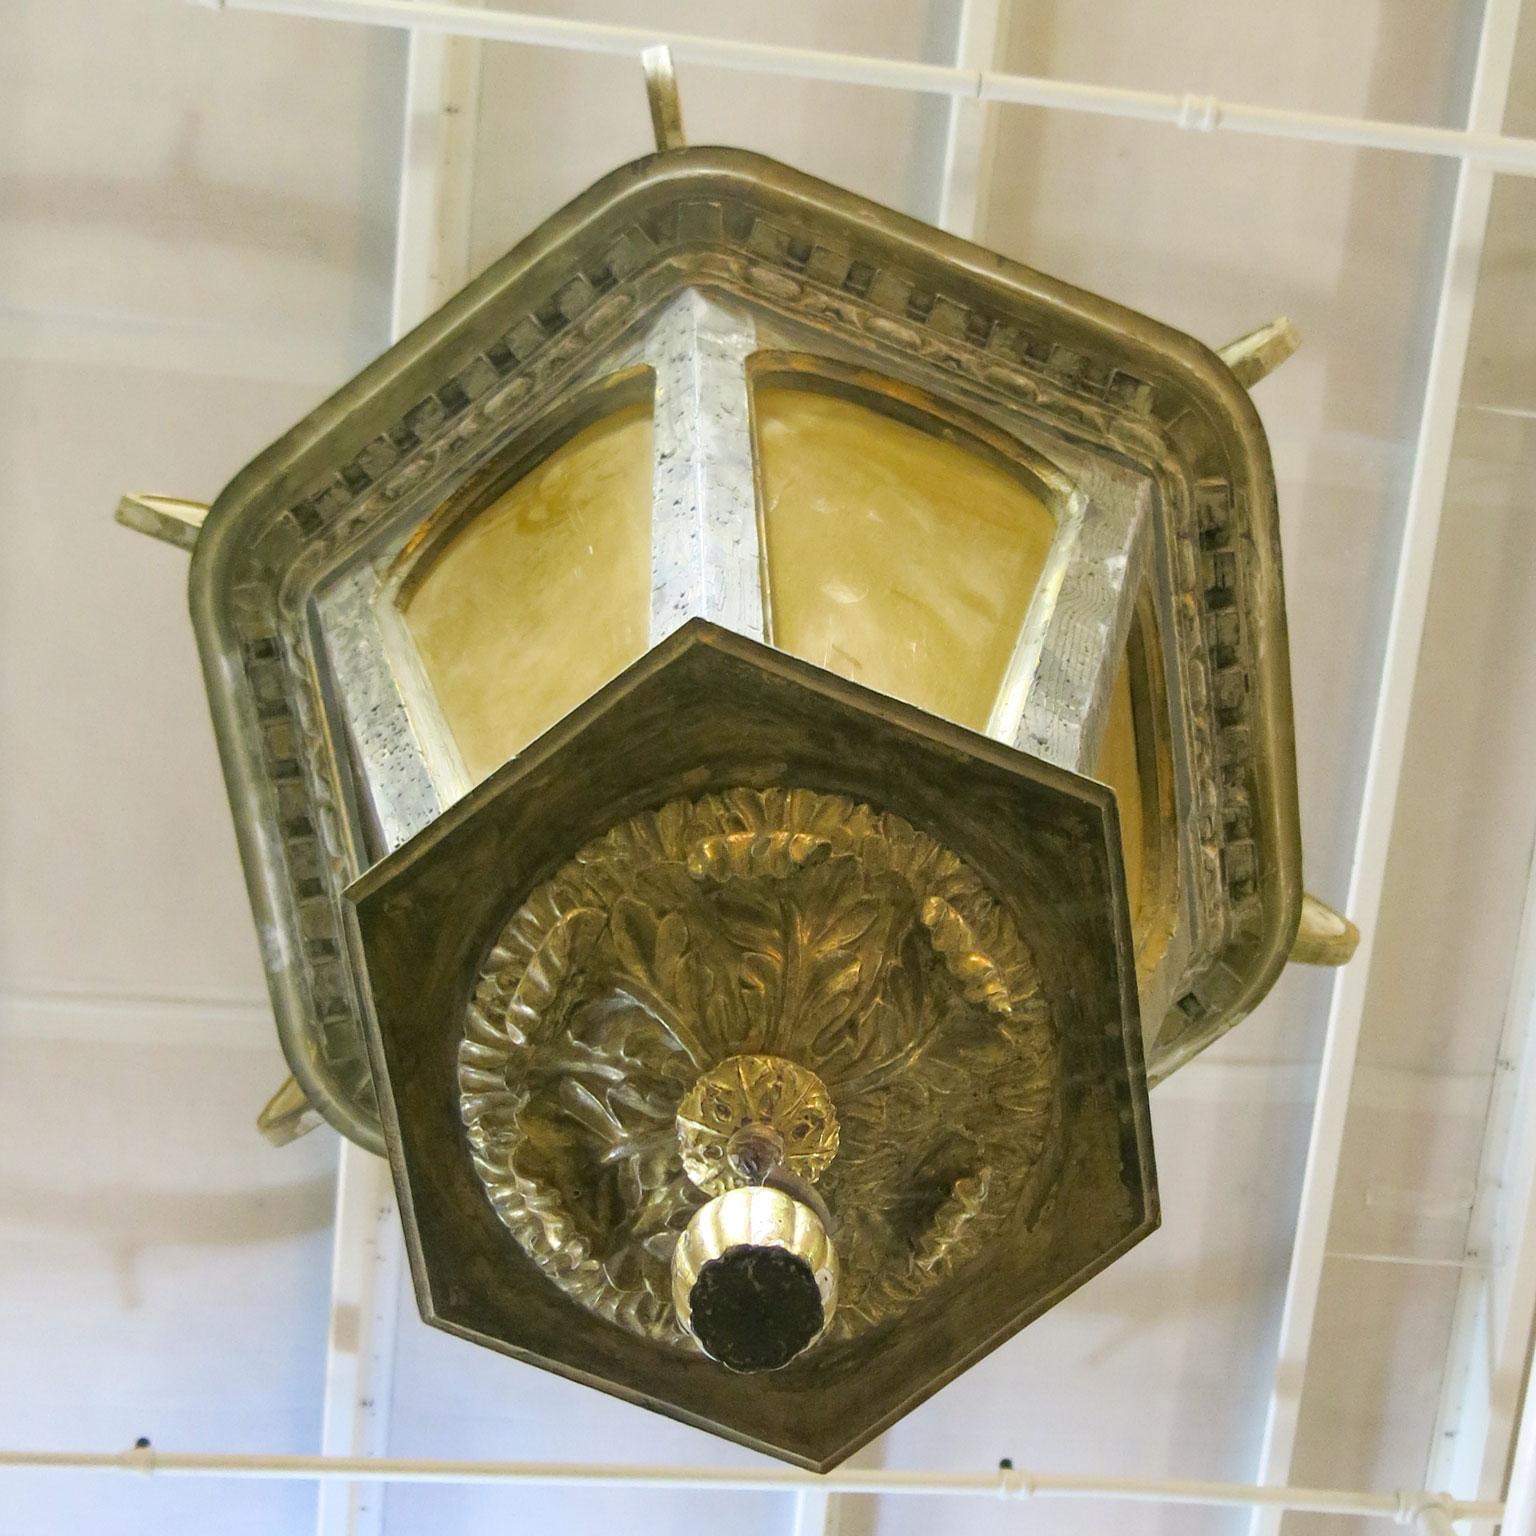 This is an Italian carved wood lantern chandelier. The size is very large and more impressive in person. It has a worn out painted finish, some white and some a rich blue grey. There is a subtle gold on the top scrolls. This has been electrified